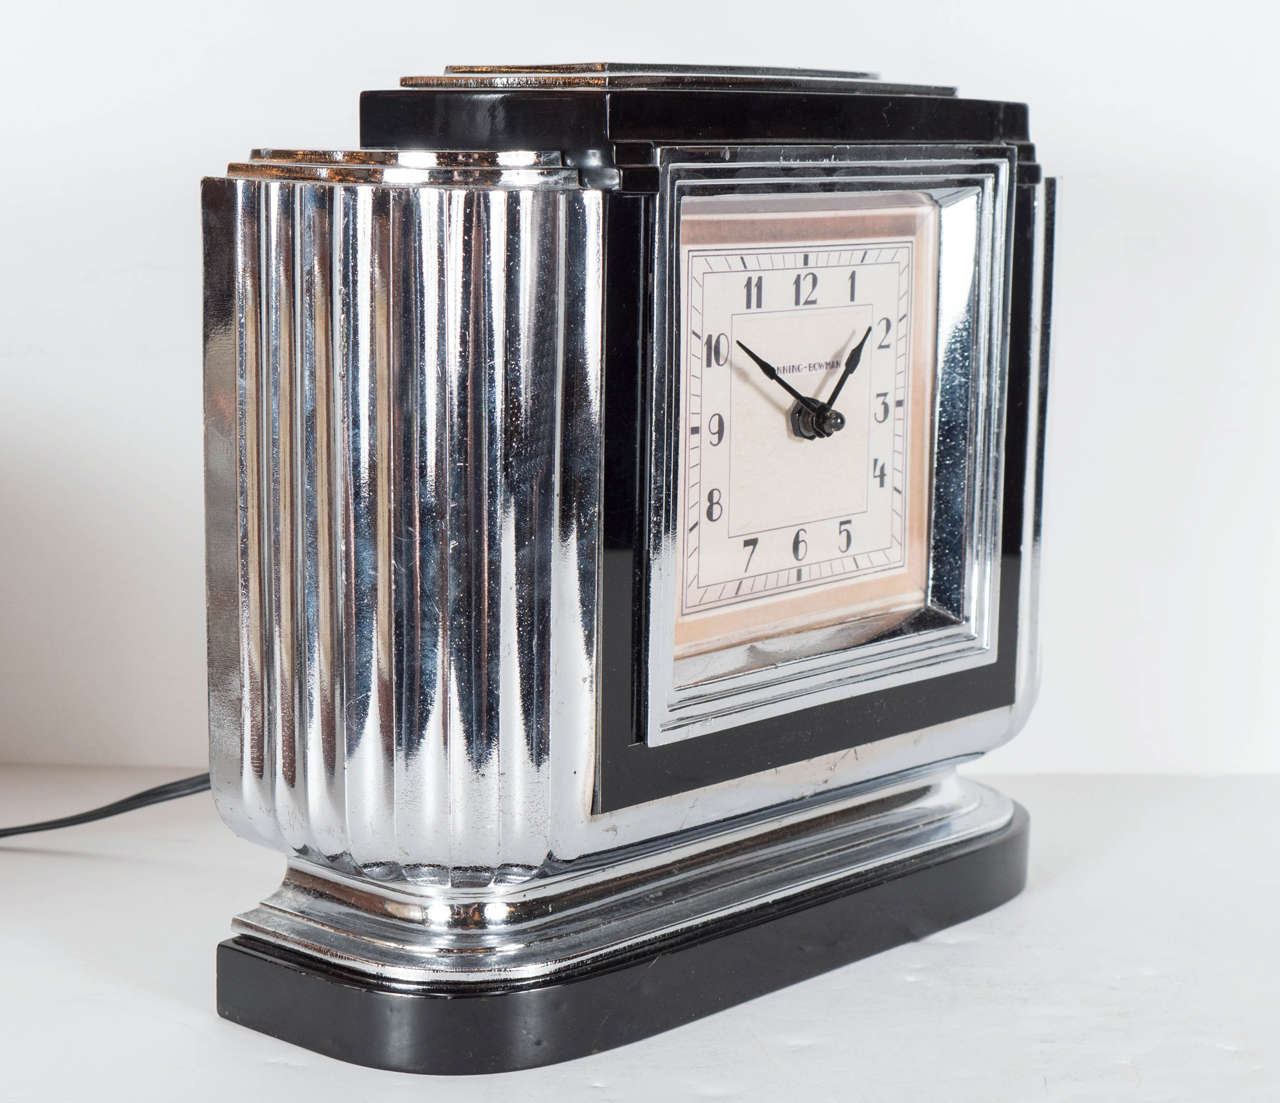 This exceptional skyscraper style electric mantel clock is by Manning Bowman. It features a skyscraper stepped style design in chrome with fluted detailing on the side, and black enamel accents. It has a square face, streamlined design, and can be